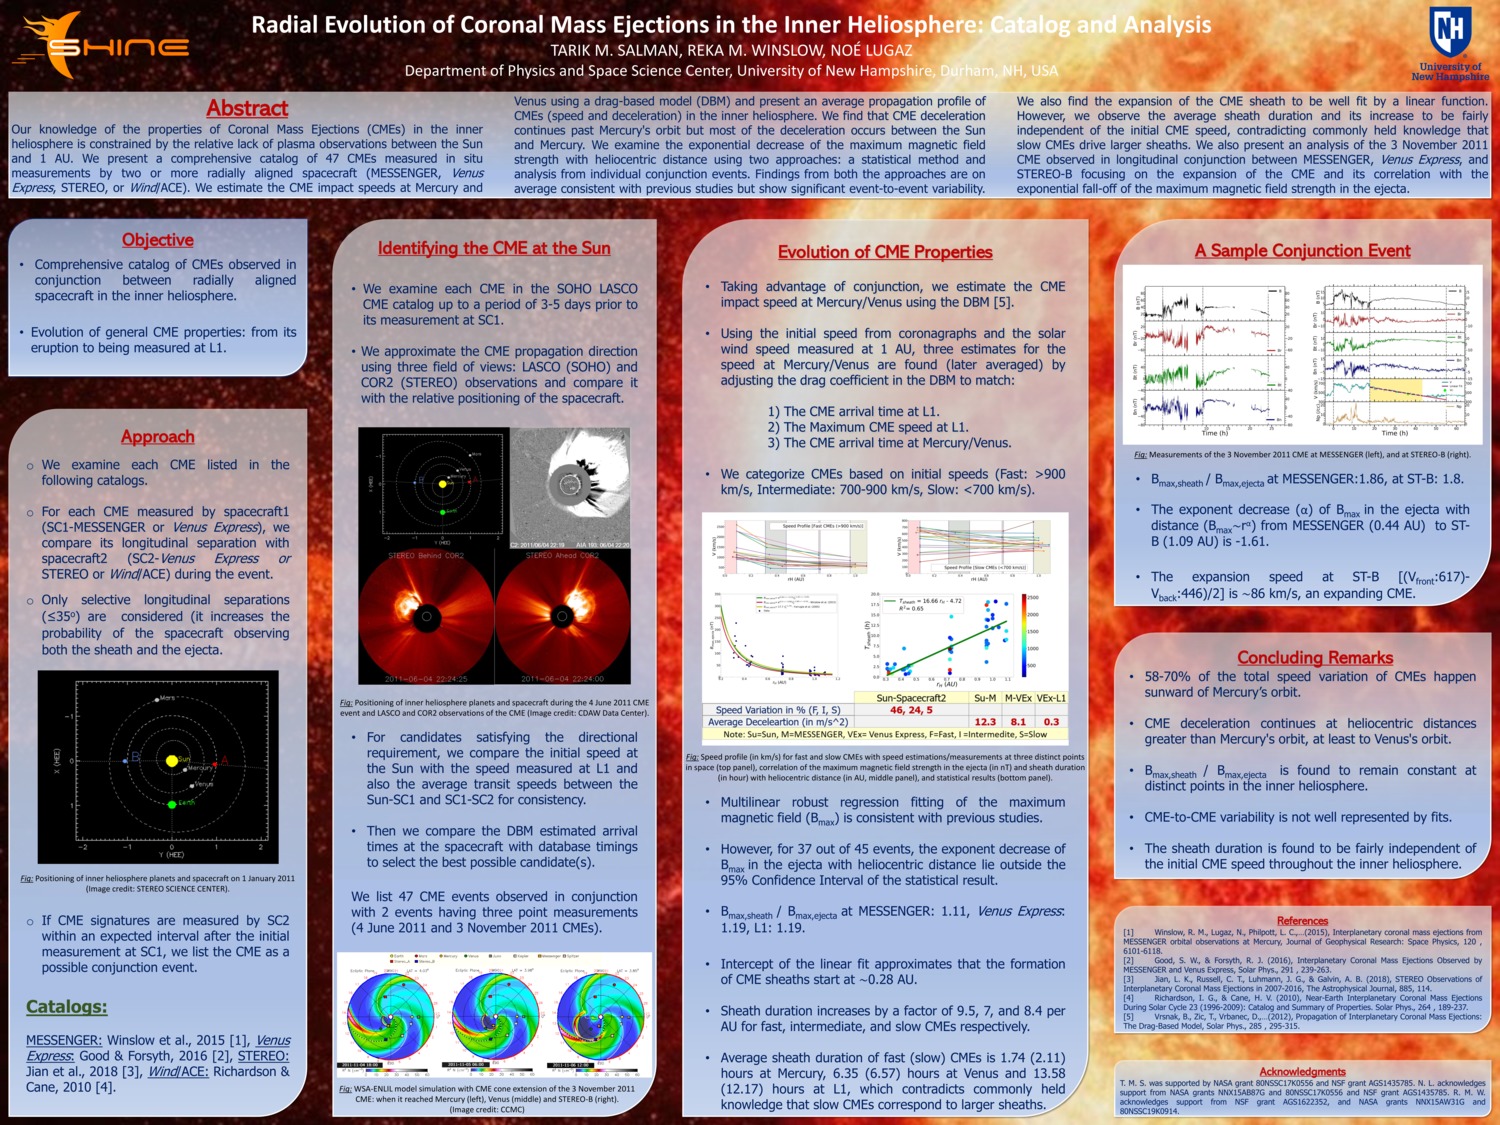 Radial Evolution Of Coronal Mass Ejections In The Inner Heliosphere: Catalog And Analysis by ts1090